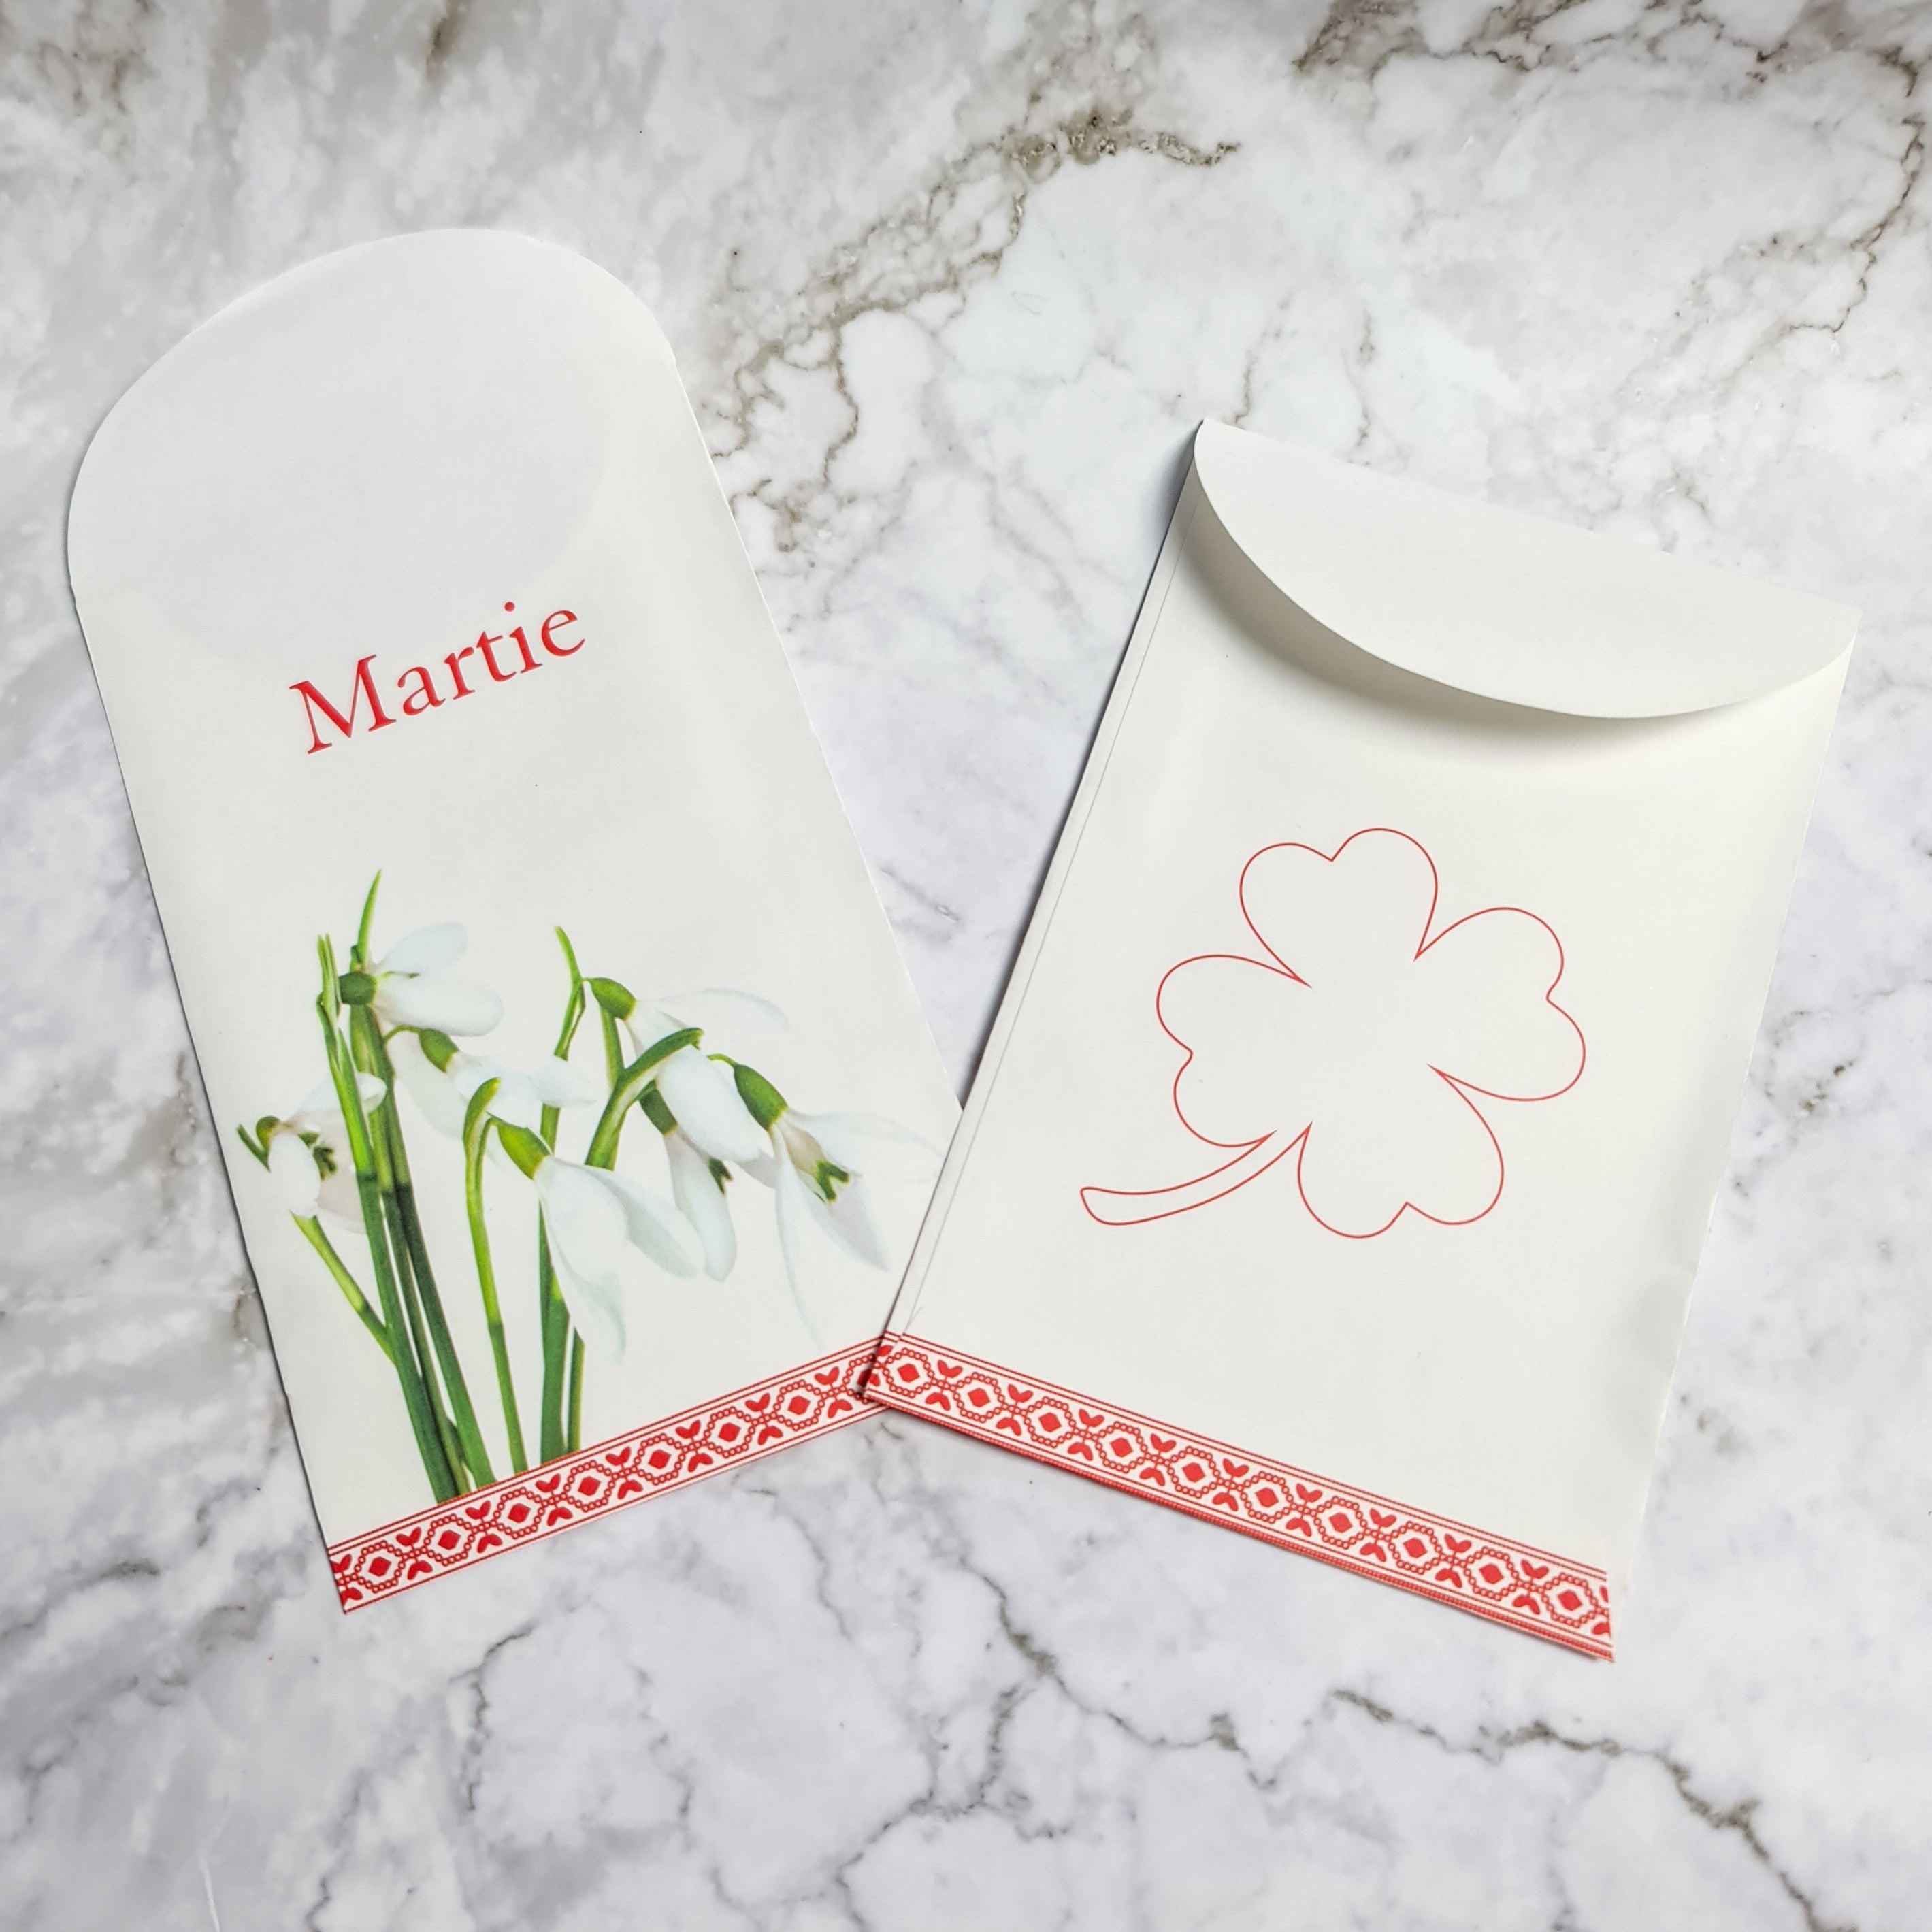 Paper envelope with snowdrops and clover, perfect for Martisor gift-giving.